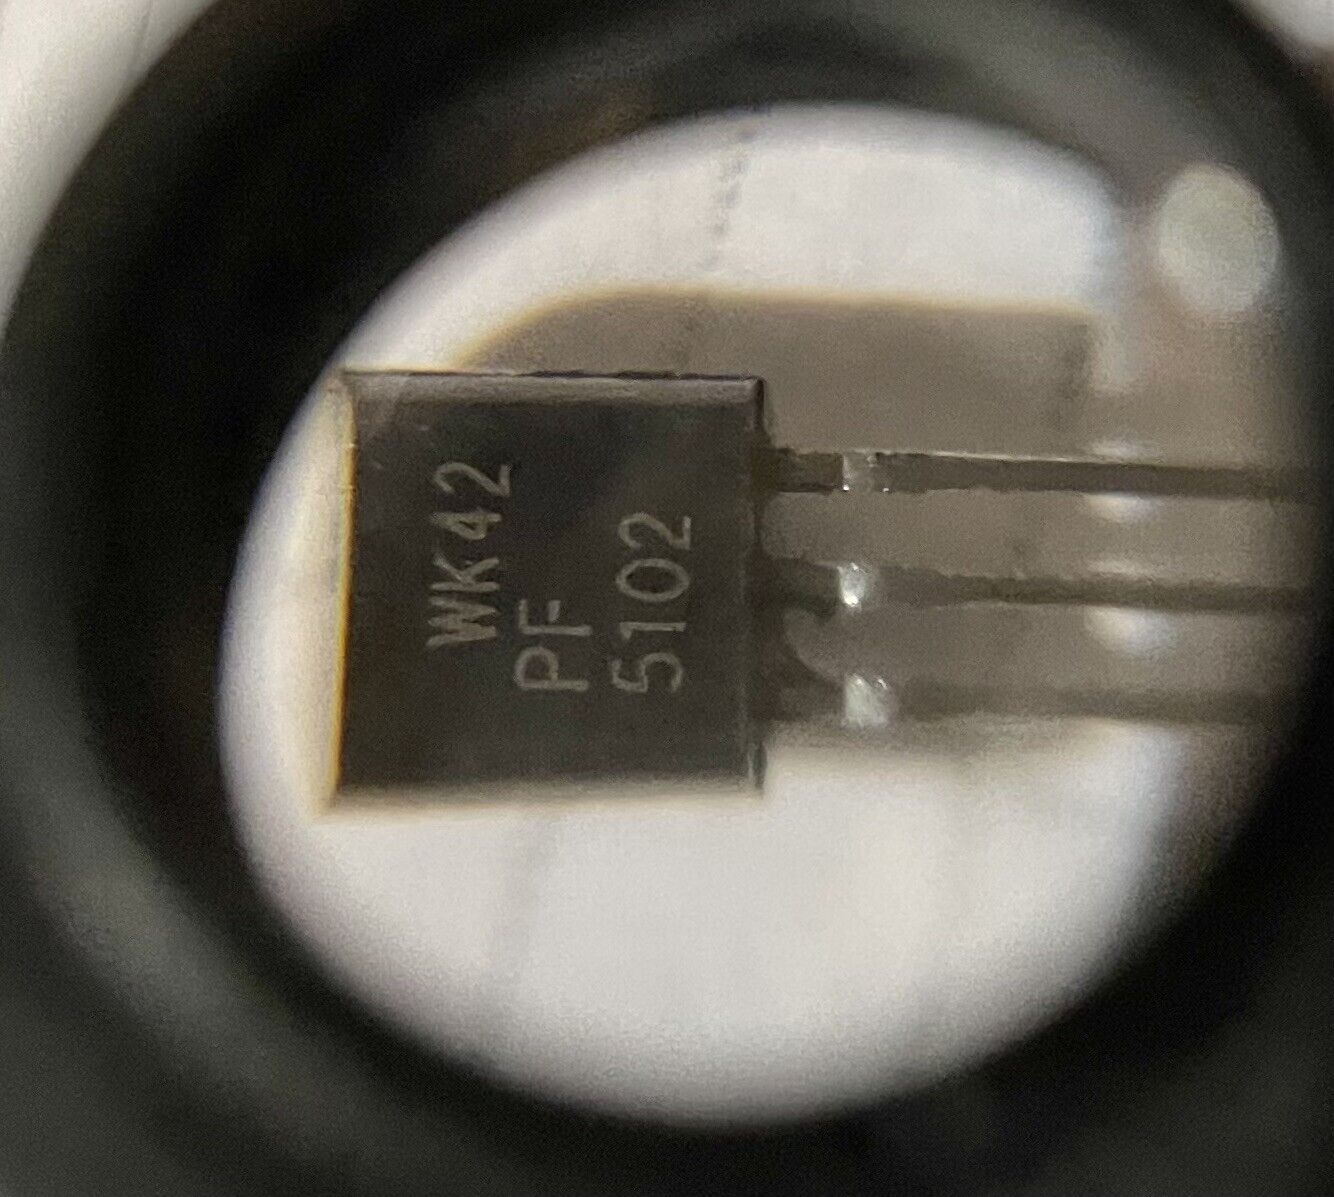 QTY 30 - NOS  On Semiconductor  Pf5102 Jfet Transistor N-Ch 40v 0.625w TO92